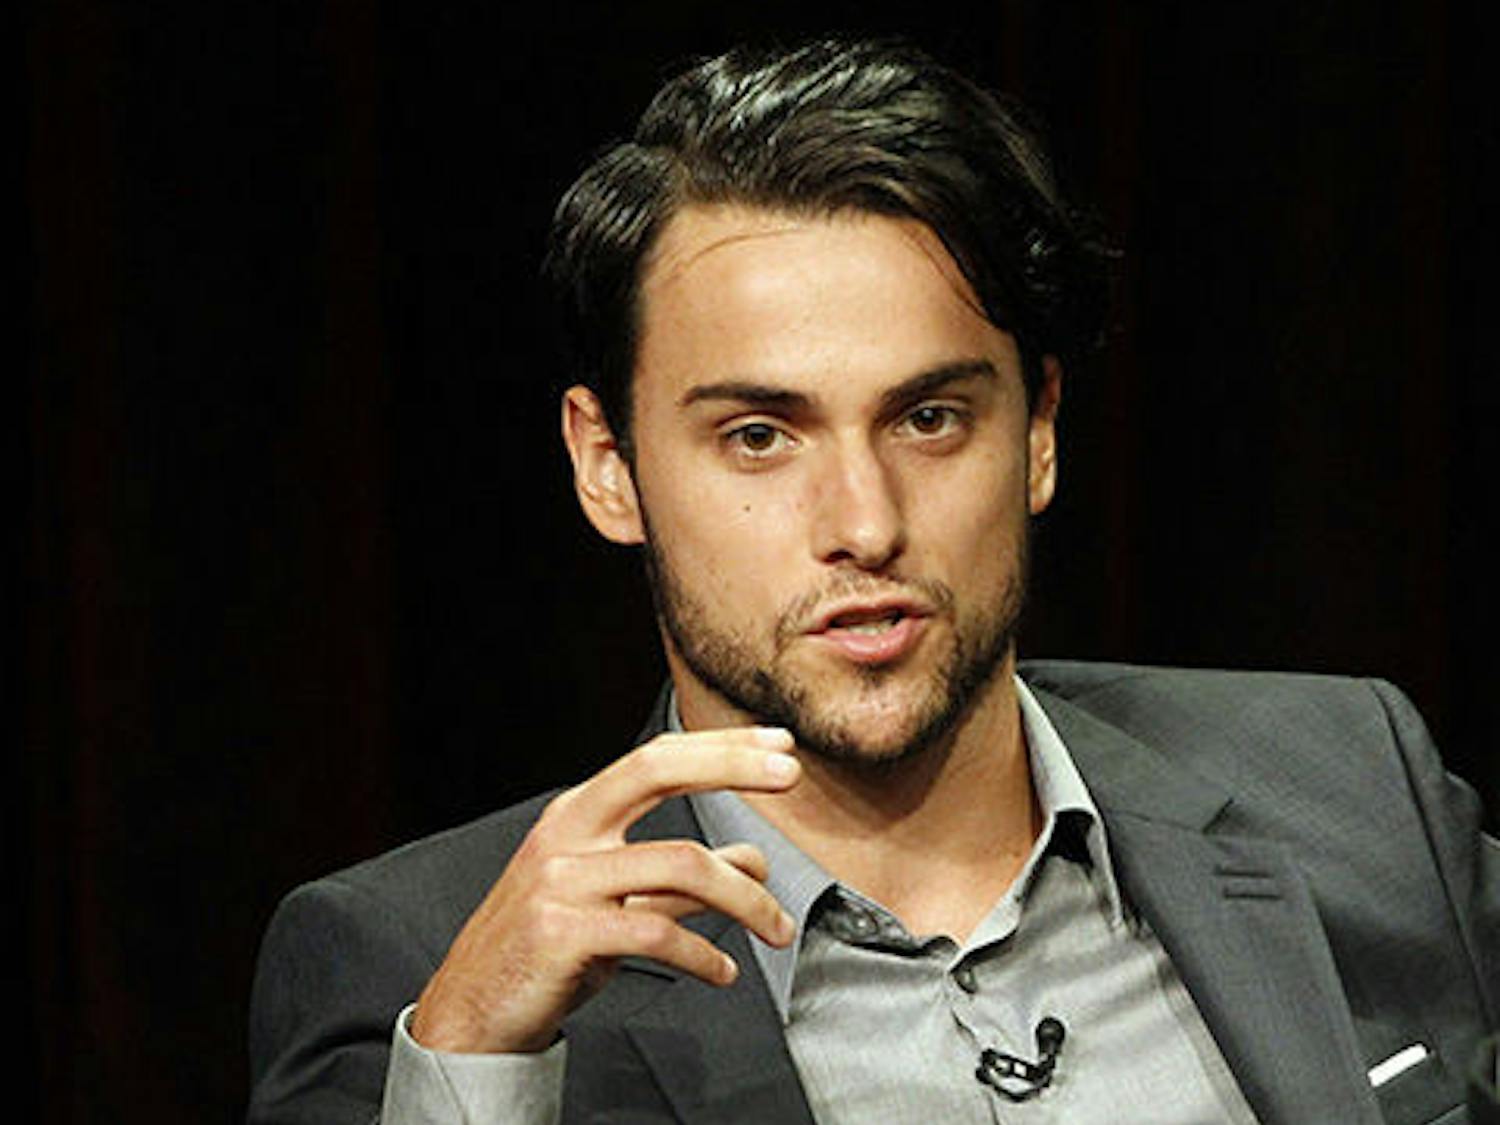 TCA SUMMER PRESS TOUR 2014 - "How to Get Away with Murder" Session - The cast and producers of ABC's "How to Get Away with Murder" addressed the press at Disney | ABC Television Group's Summer Press Tour 2014. (ABC/Rick Rowell) JACK FALAHEE